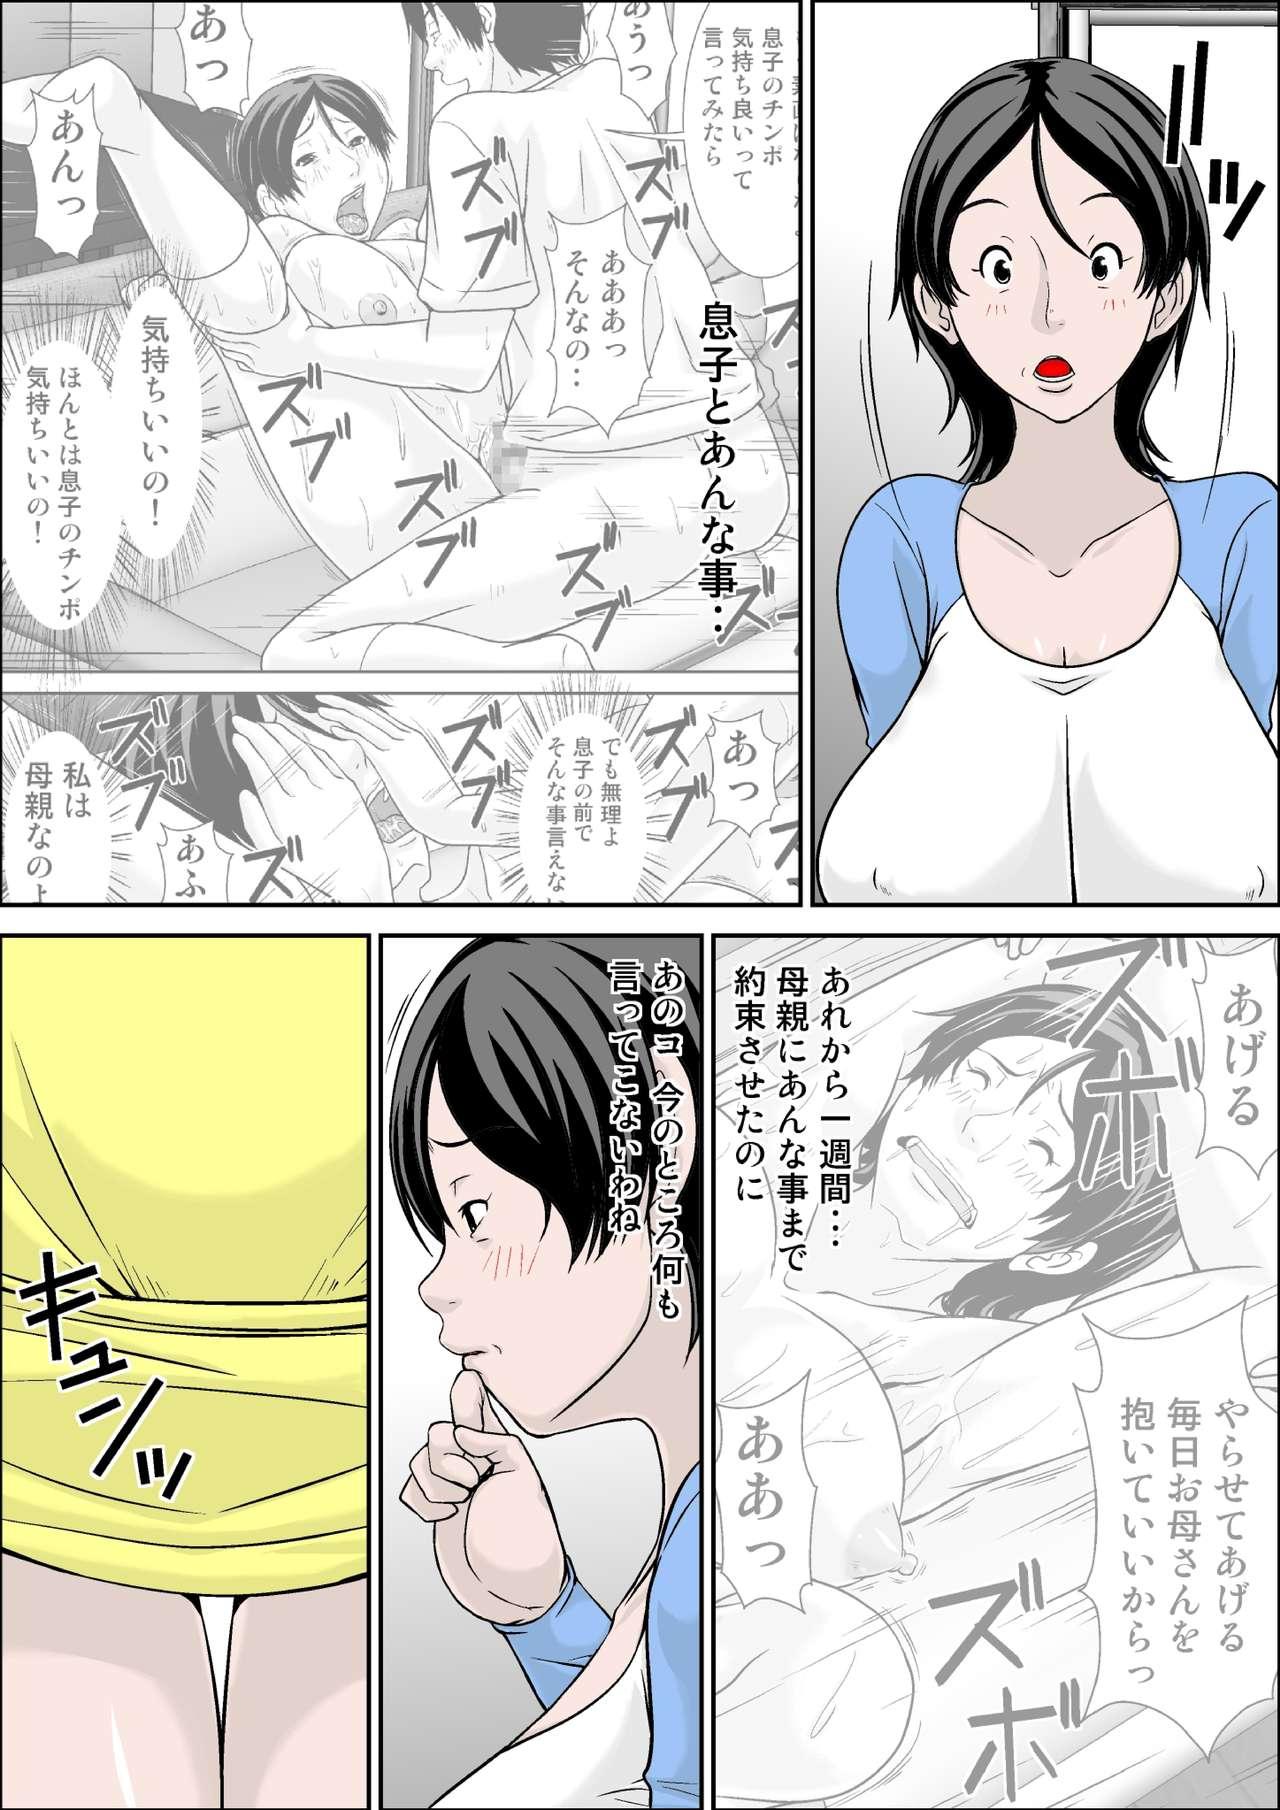 Hey! It is said that I urge you mother and will do what! ... mother Hatsujou - 1st part 2